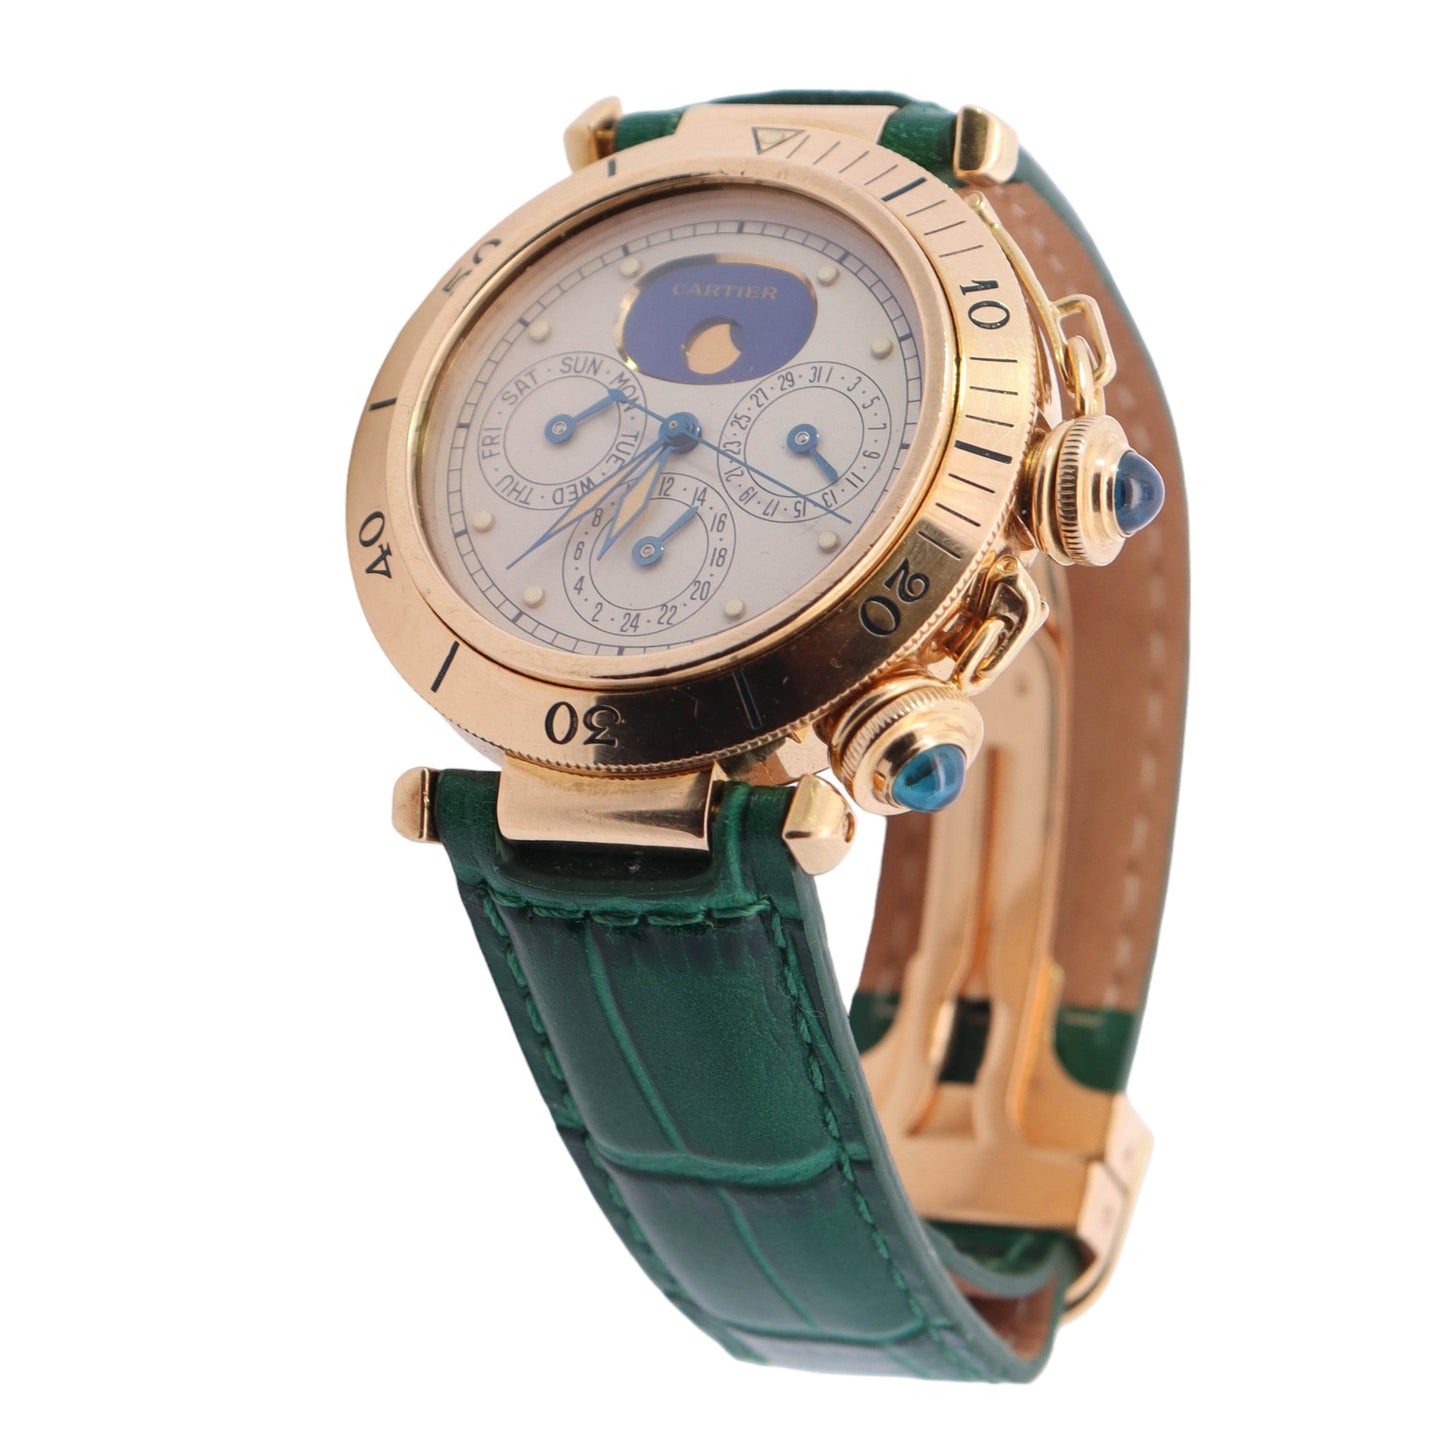 Cartier Pasha De Cartier Moonphase Dual Time Zone 18k Yellow Gold 38mm Ivory Moonphase Dot Dial Watch Reference #: 30002 - Happy Jewelers Fine Jewelry Lifetime Warranty